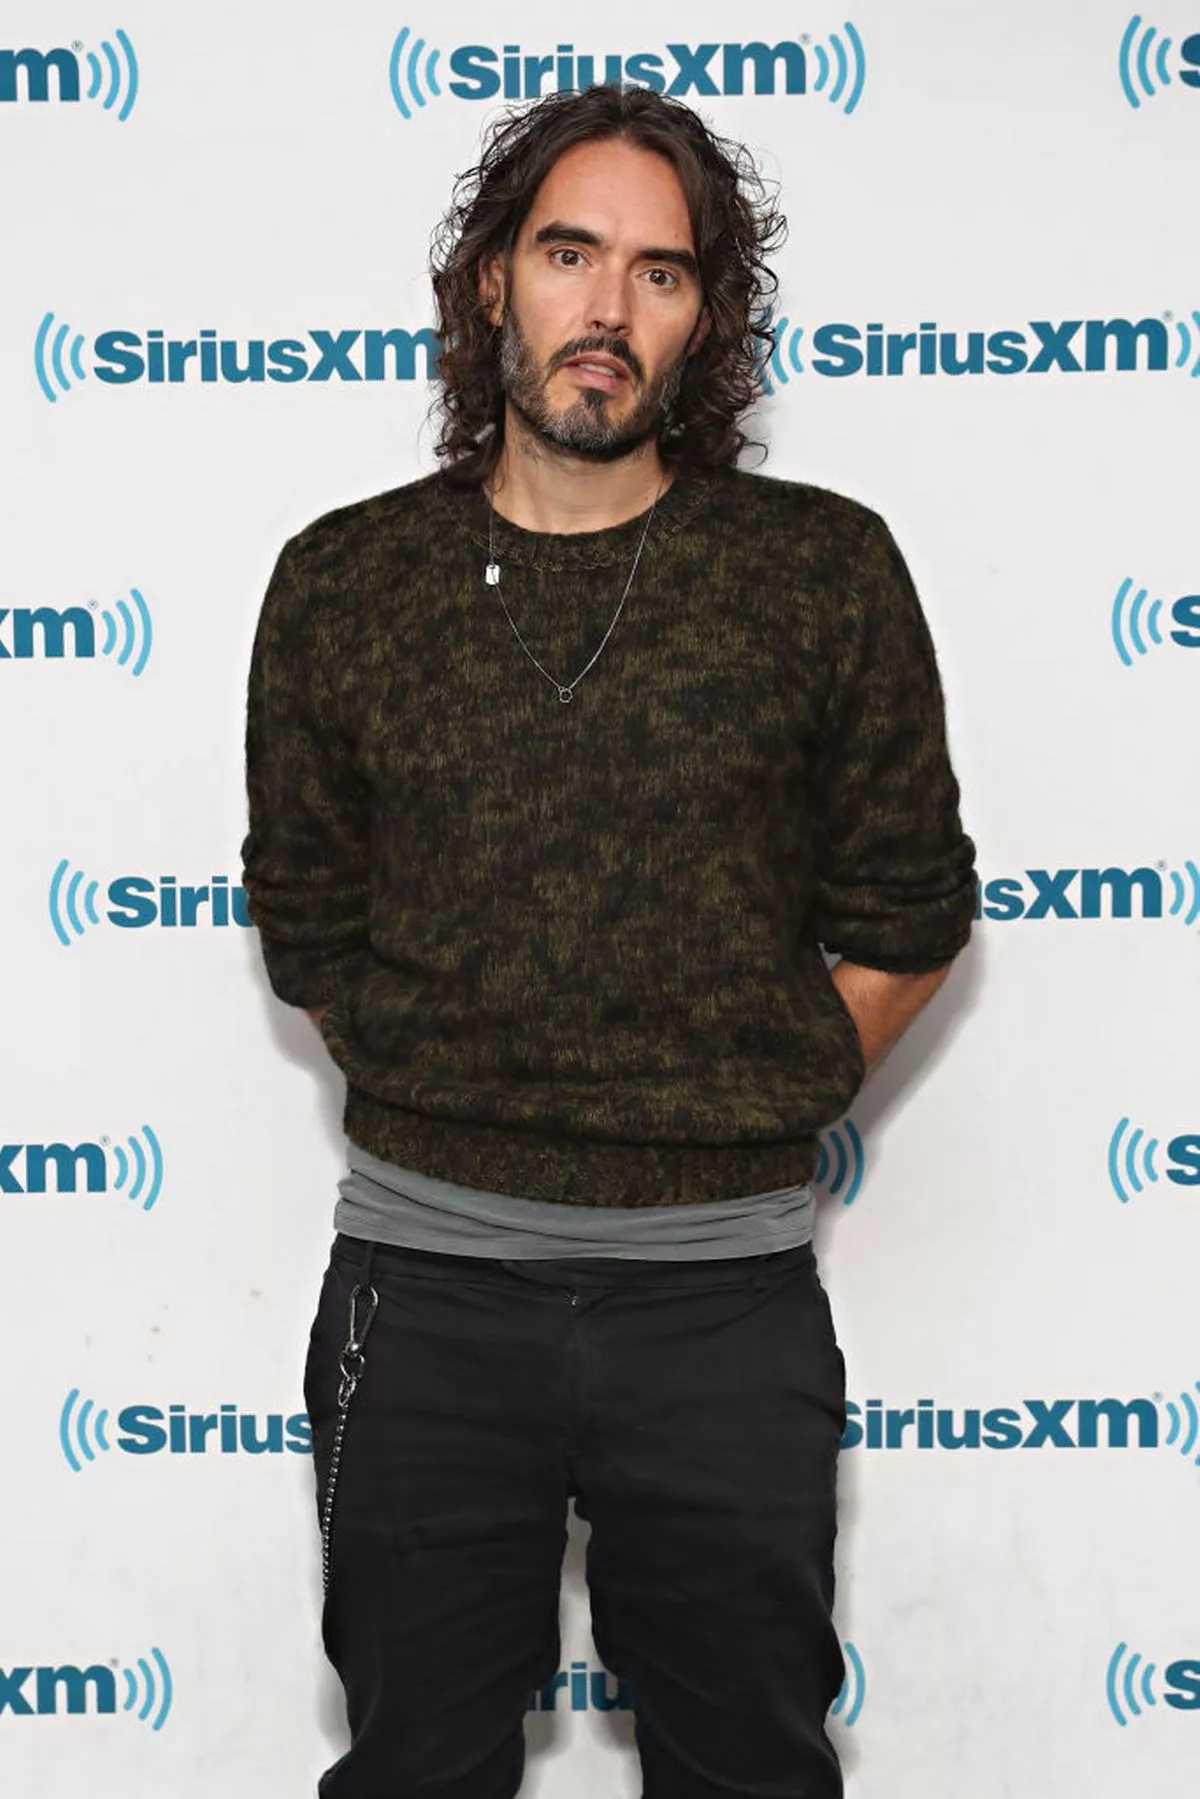 Russell Brand questioned by police over past sexual offense allegations, which he denies (2)